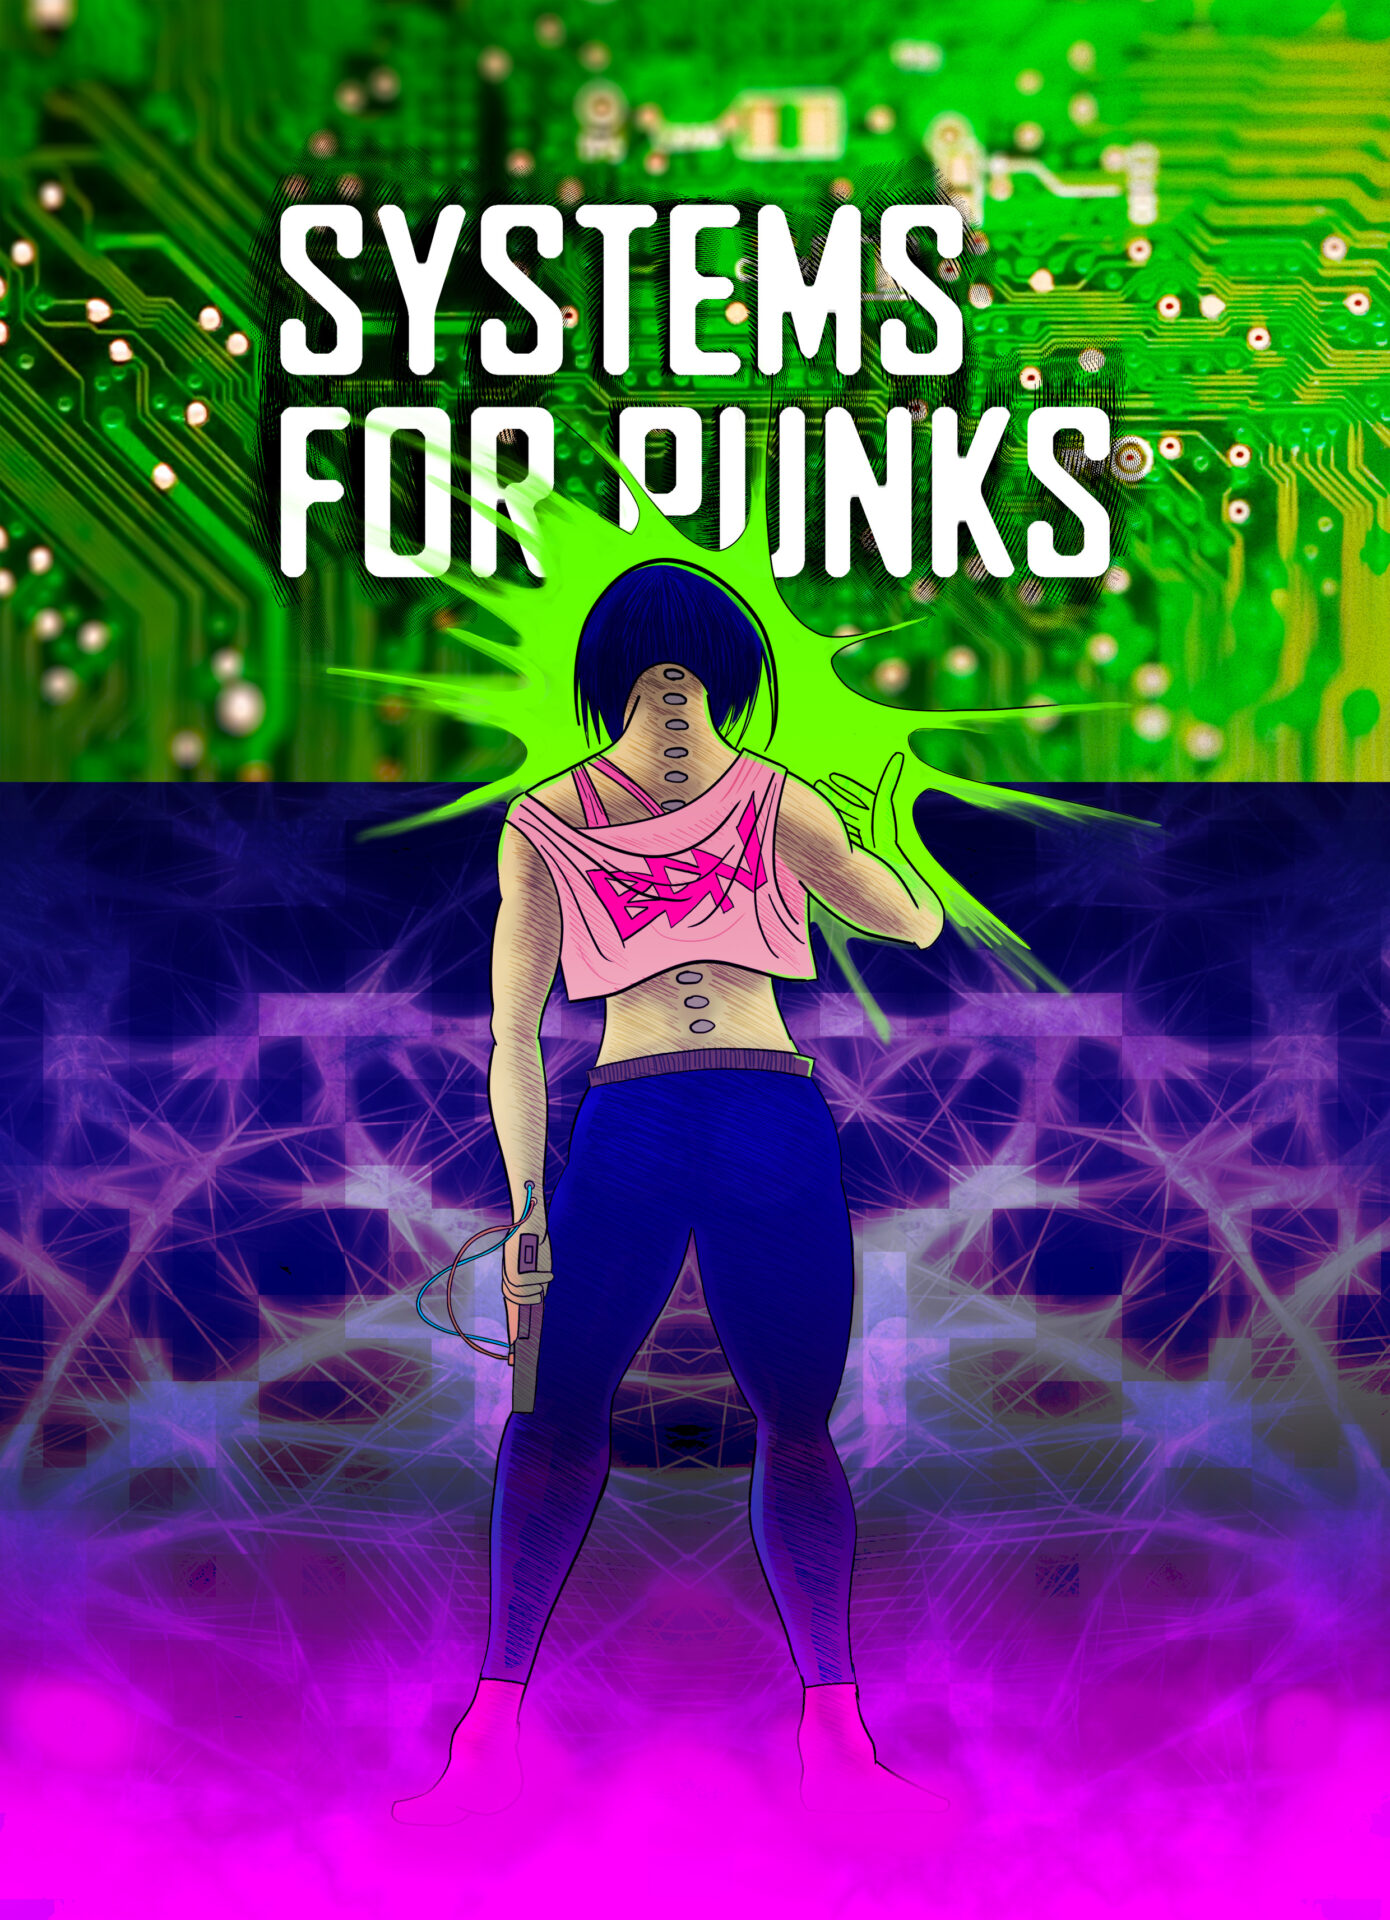 Systems For Punks